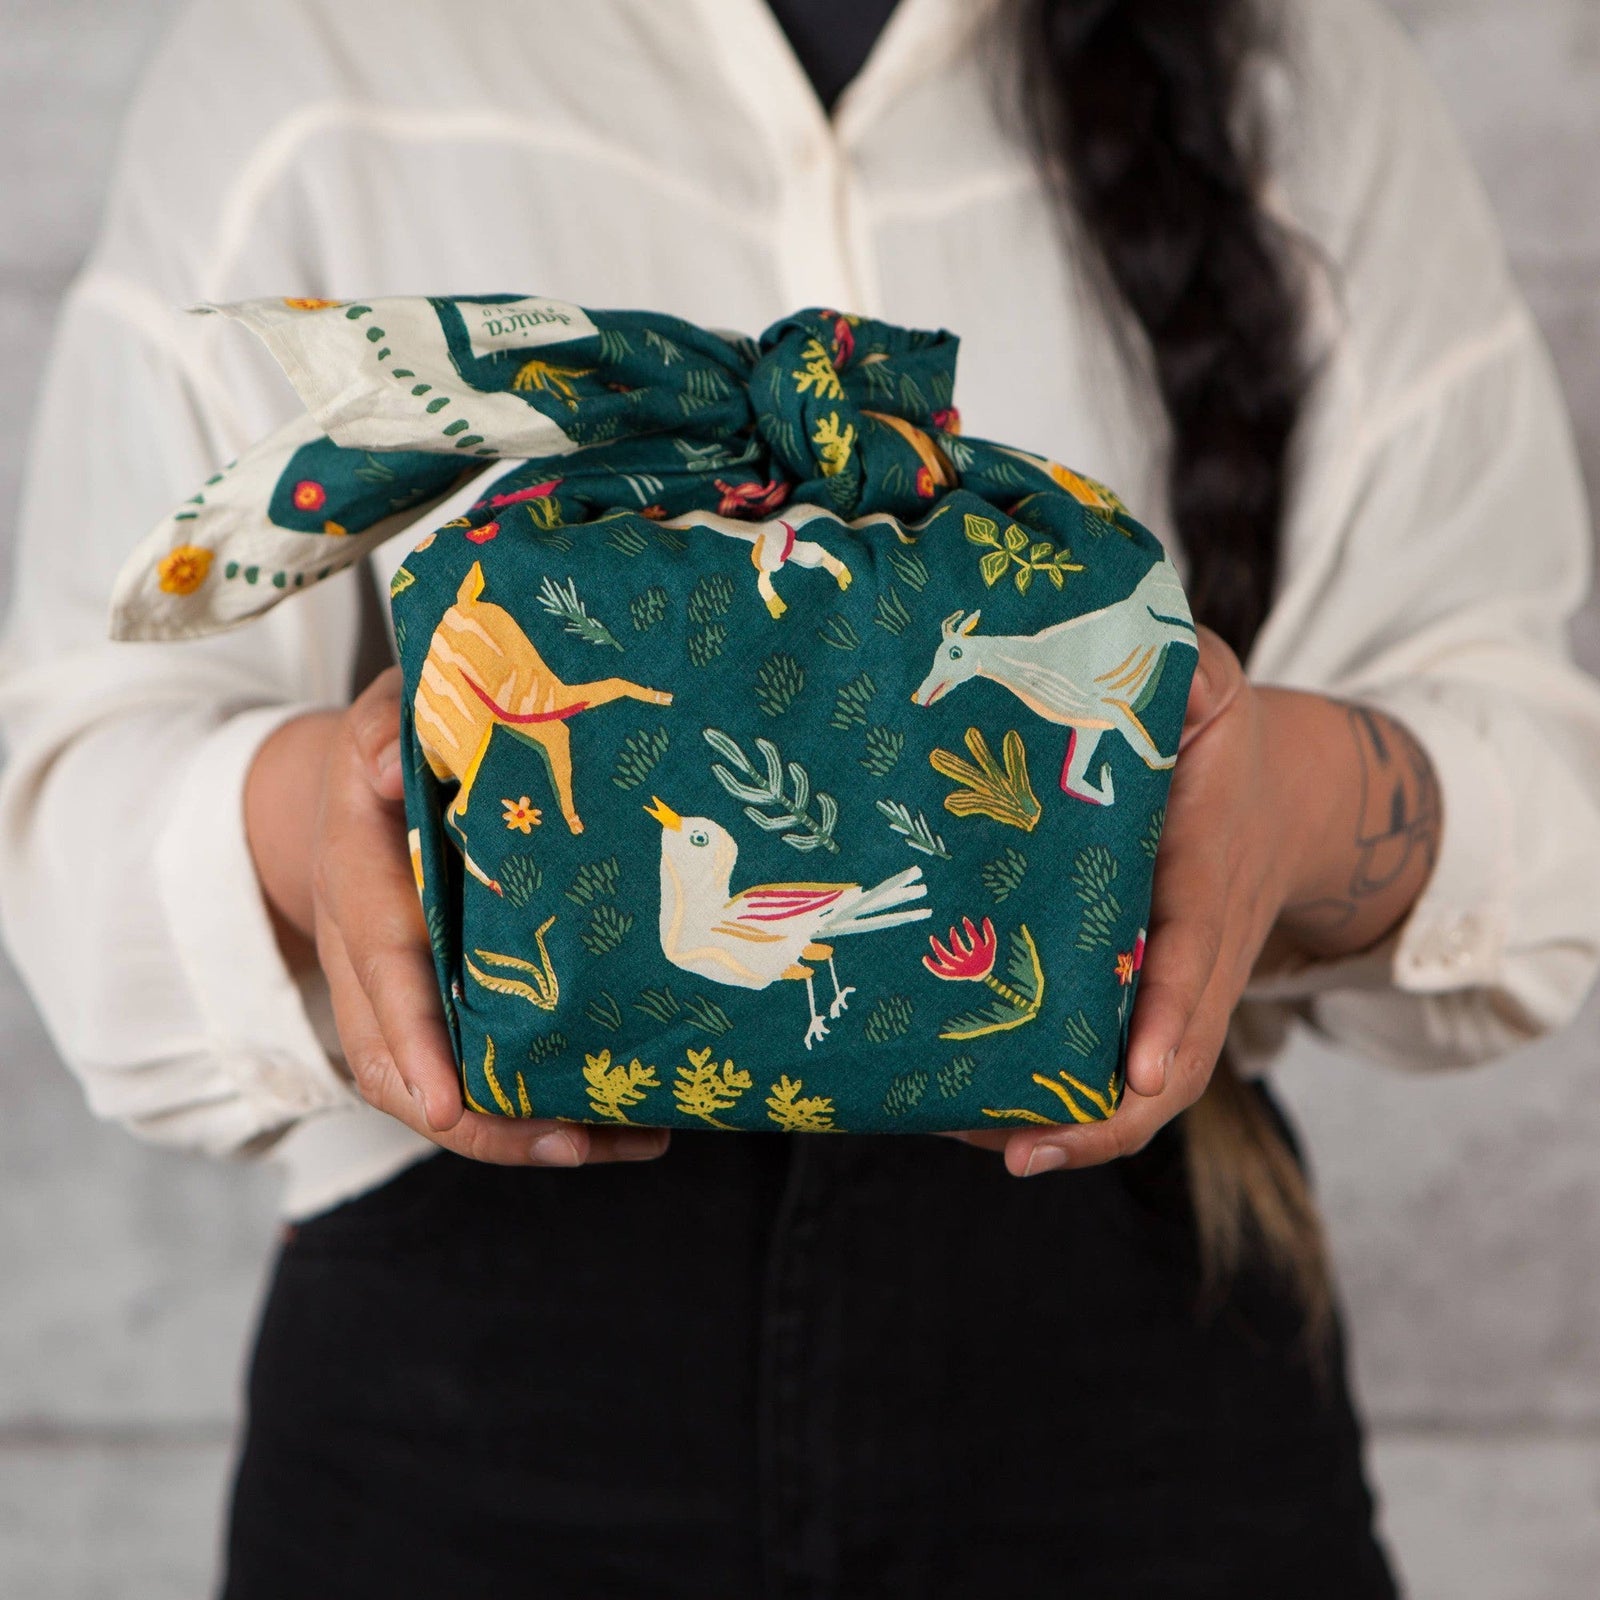 Boundless Recycled Reusable Gift Wrap | Rewrapped Repurpose and Wear Fabric Square Wrapper